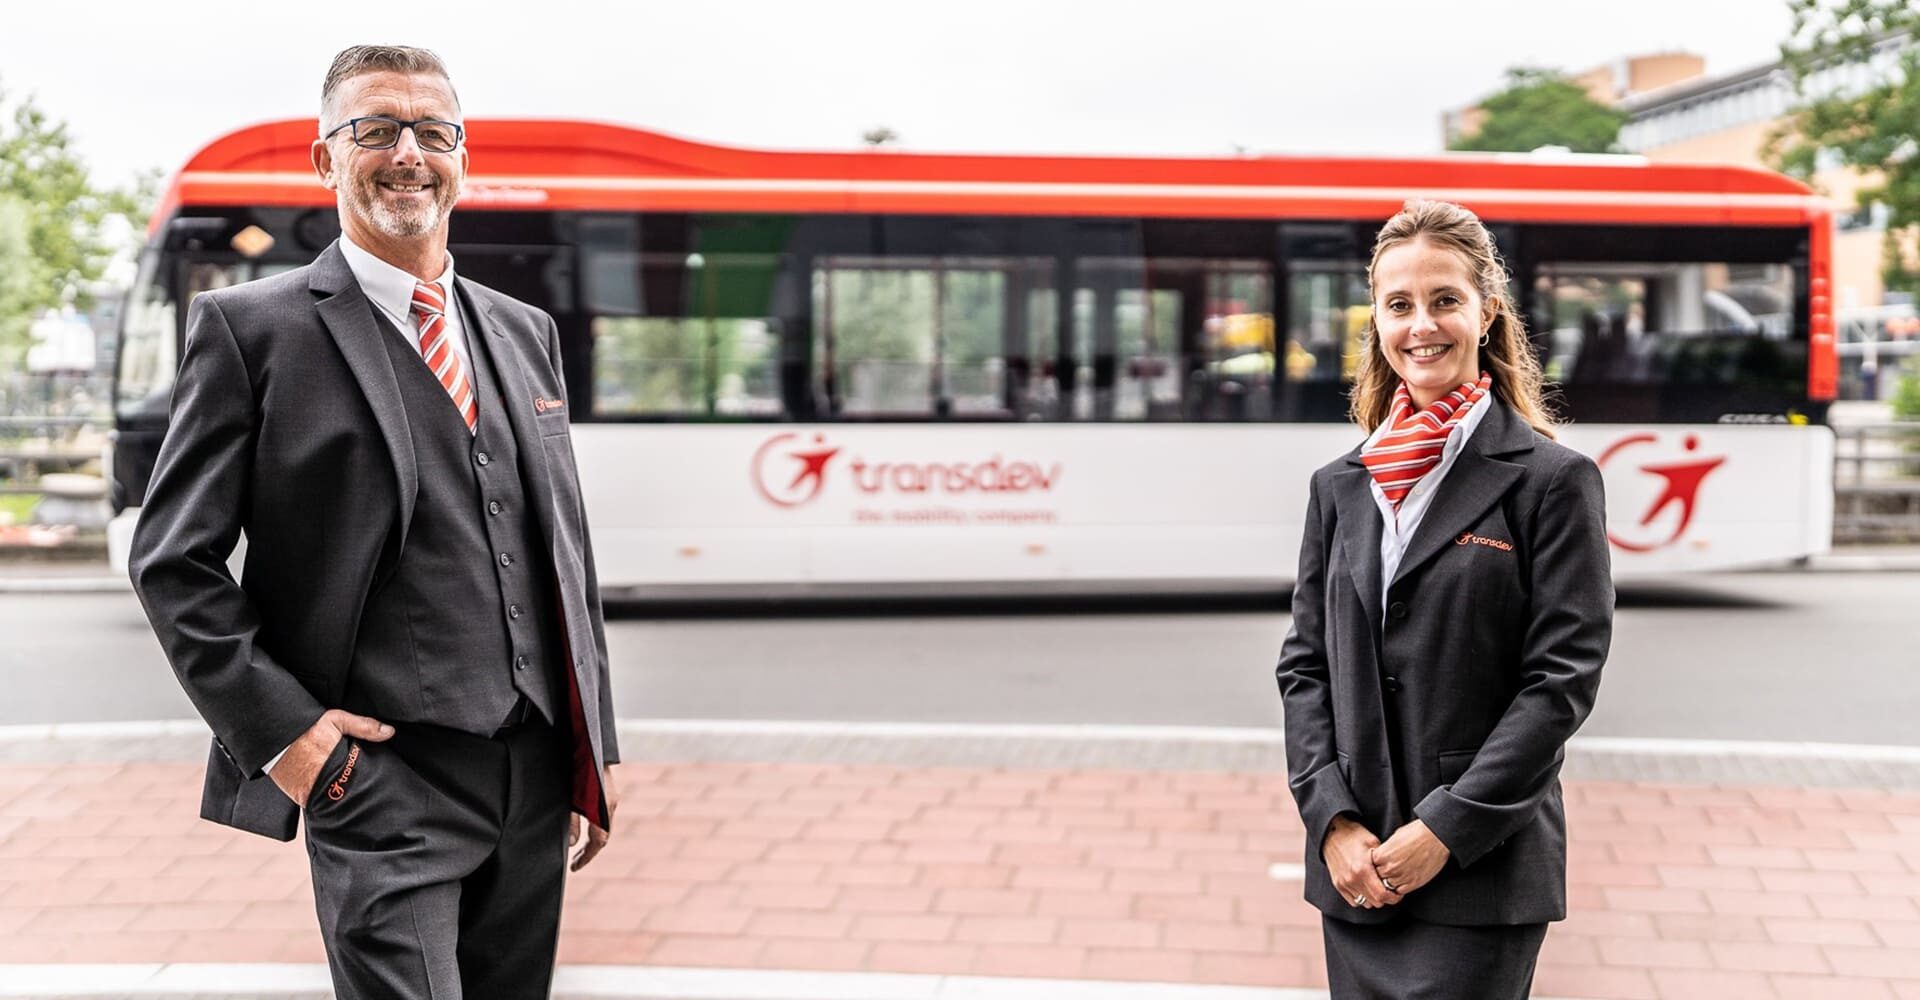 employees in front of a transdev bus